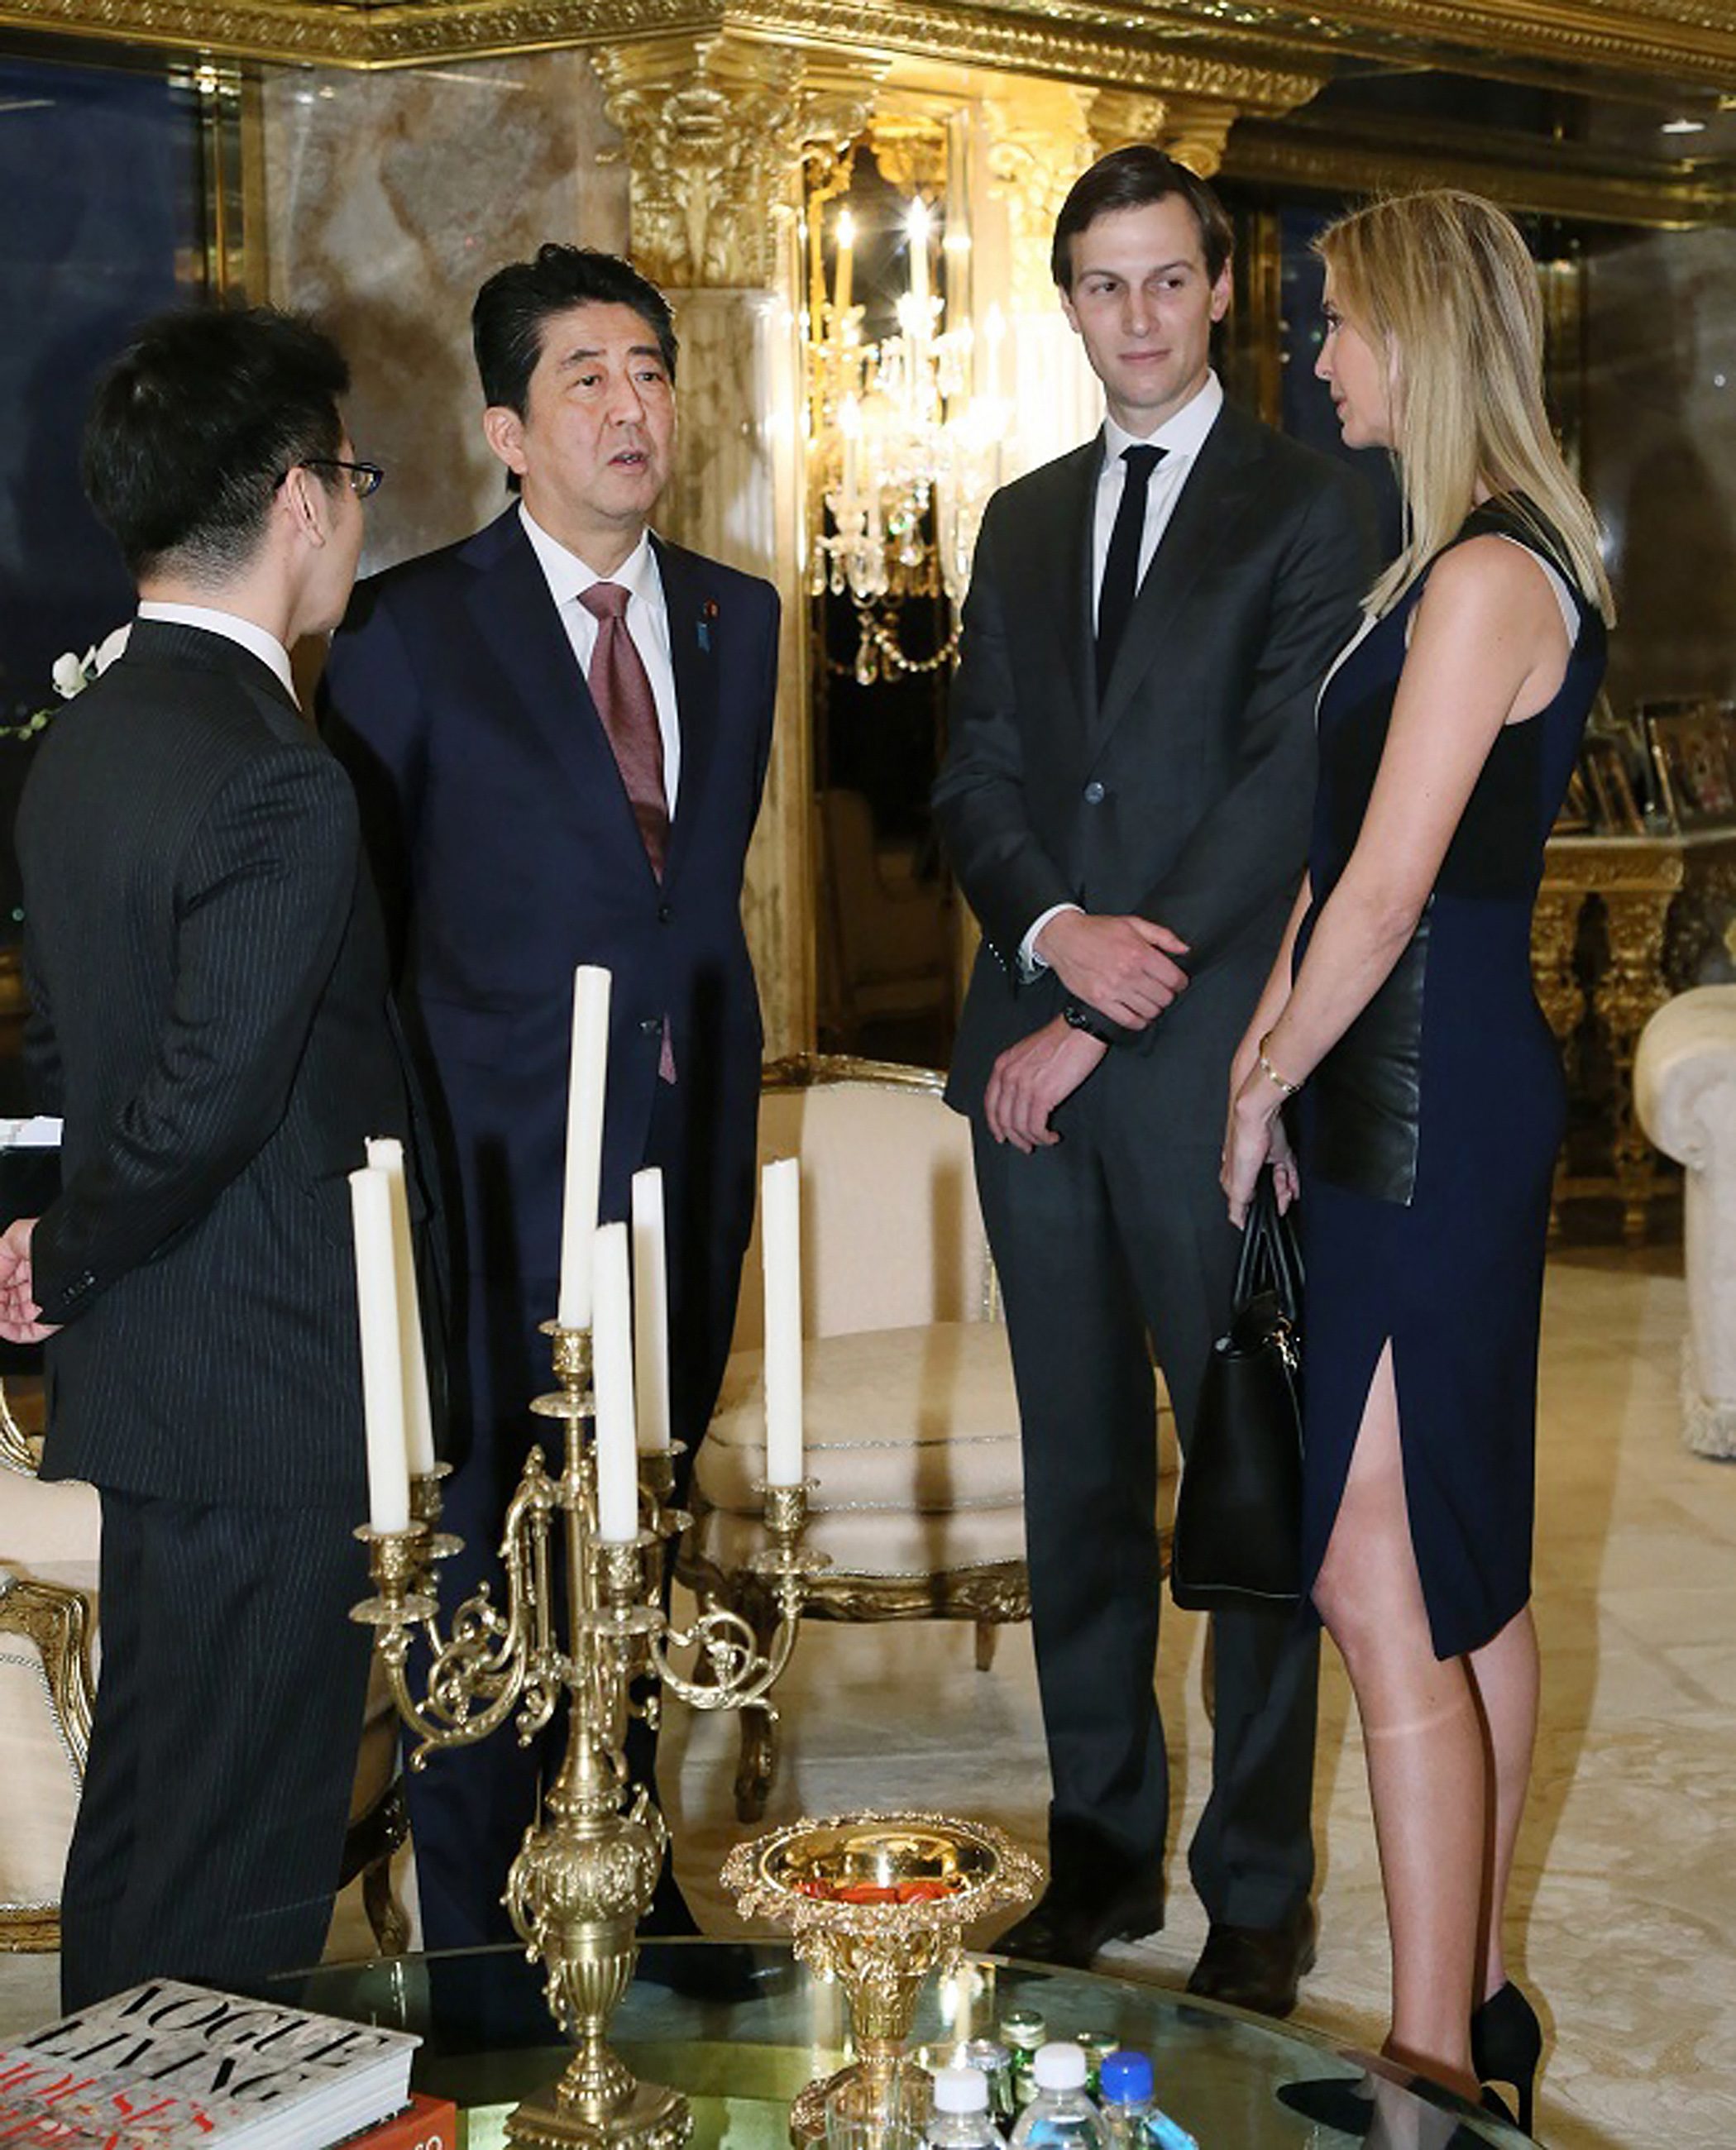 This handout picture, released by Japan's Cabinet Secretariat on November 18, 2016 shows Japanese Prime Minister Shinzo Abe (2nd L) being welcomed by Ivanka Trump (R) and her husband Jared Kushner (2nd R) during a meeting with US President-elect Donald Trump (not pictured) in New York. Abe voiced confidence on November 17 about Trump as he became the first foreign leader to meet the US president-elect, who was narrowing in on cabinet choices. / AFP PHOTO / Cabinet Secretariat / HO / HANDOUT RESTRICTED TO EDITORIAL USE - MANDATORY CREDIT "AFP PHOTO / CABINET SECRETARIAT" - NO MARKETING - NO ADVERTISING CAMPAIGNS - DISTRIBUTED AS A SERVICE TO CLIENTS